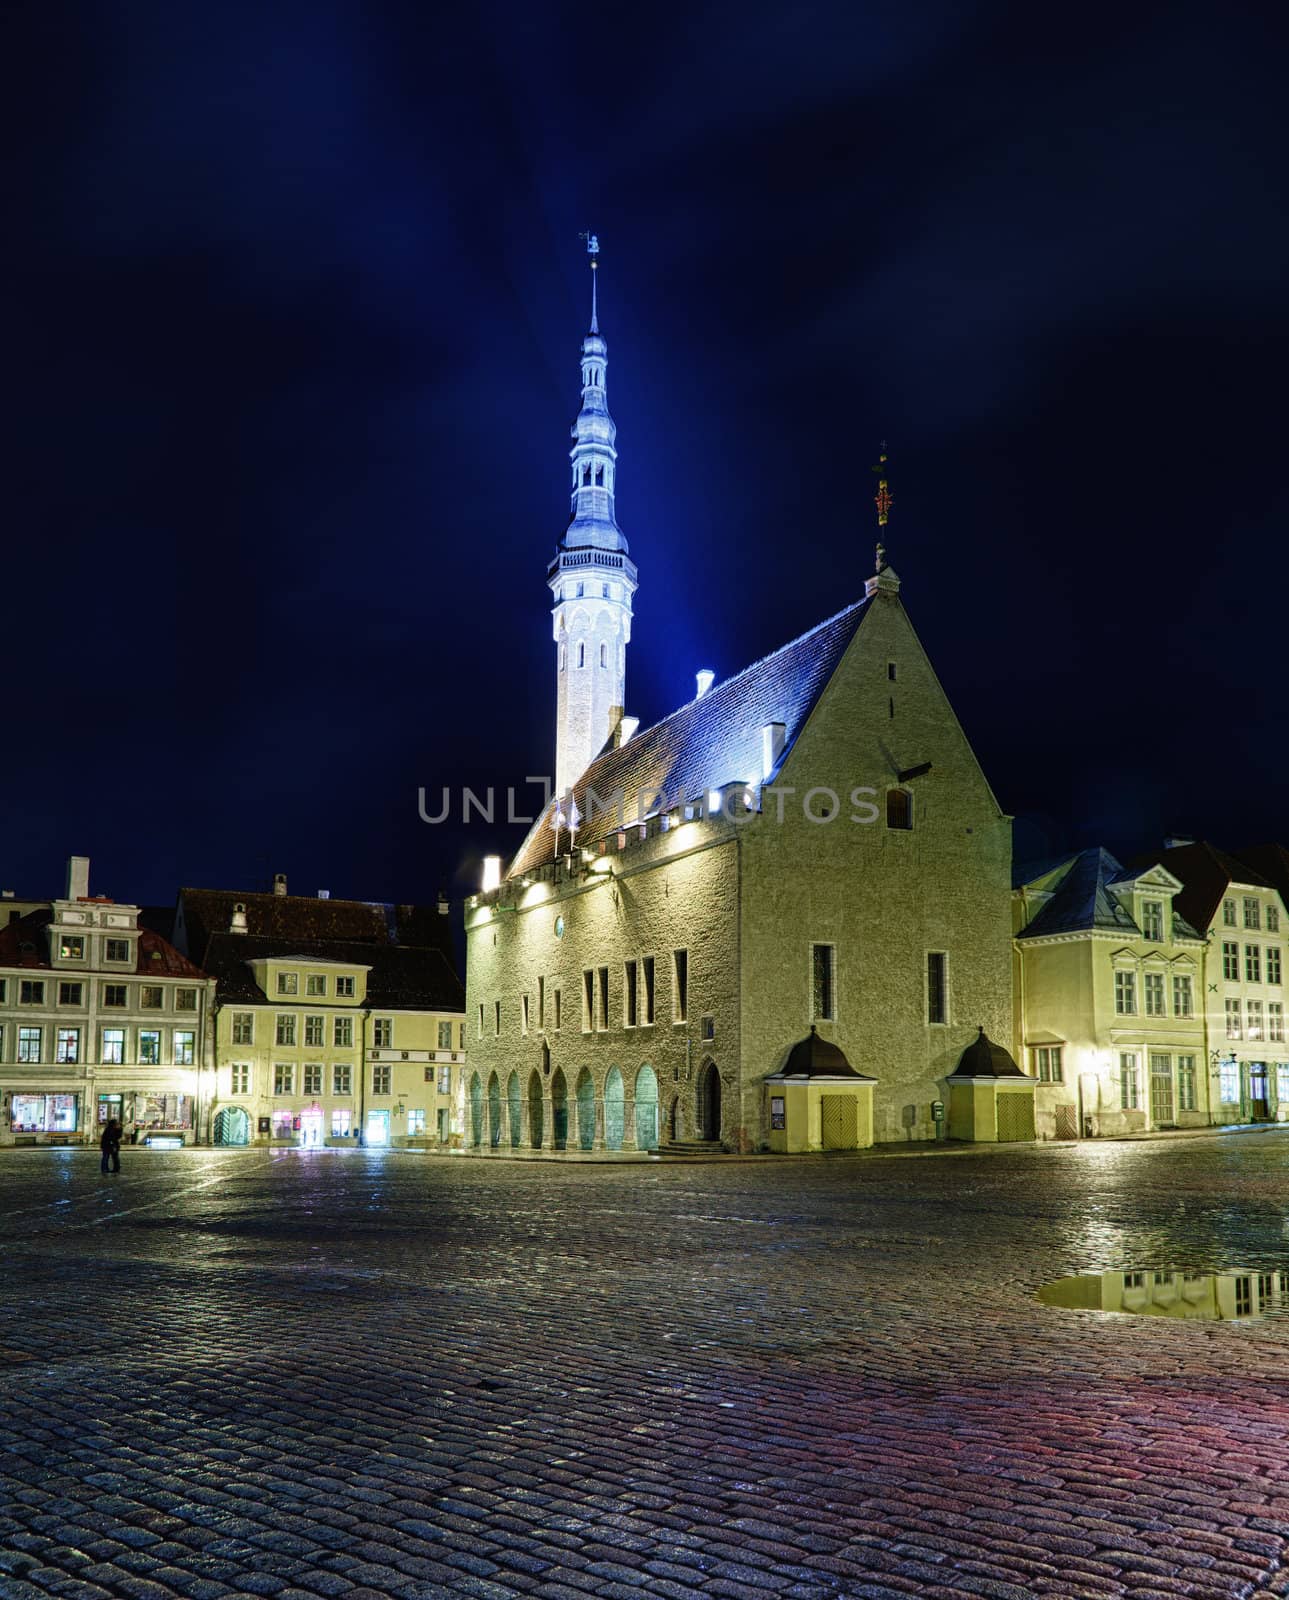 Tallinn town hall at night in Raekoya square showing the floodlit spire and tower of the hall